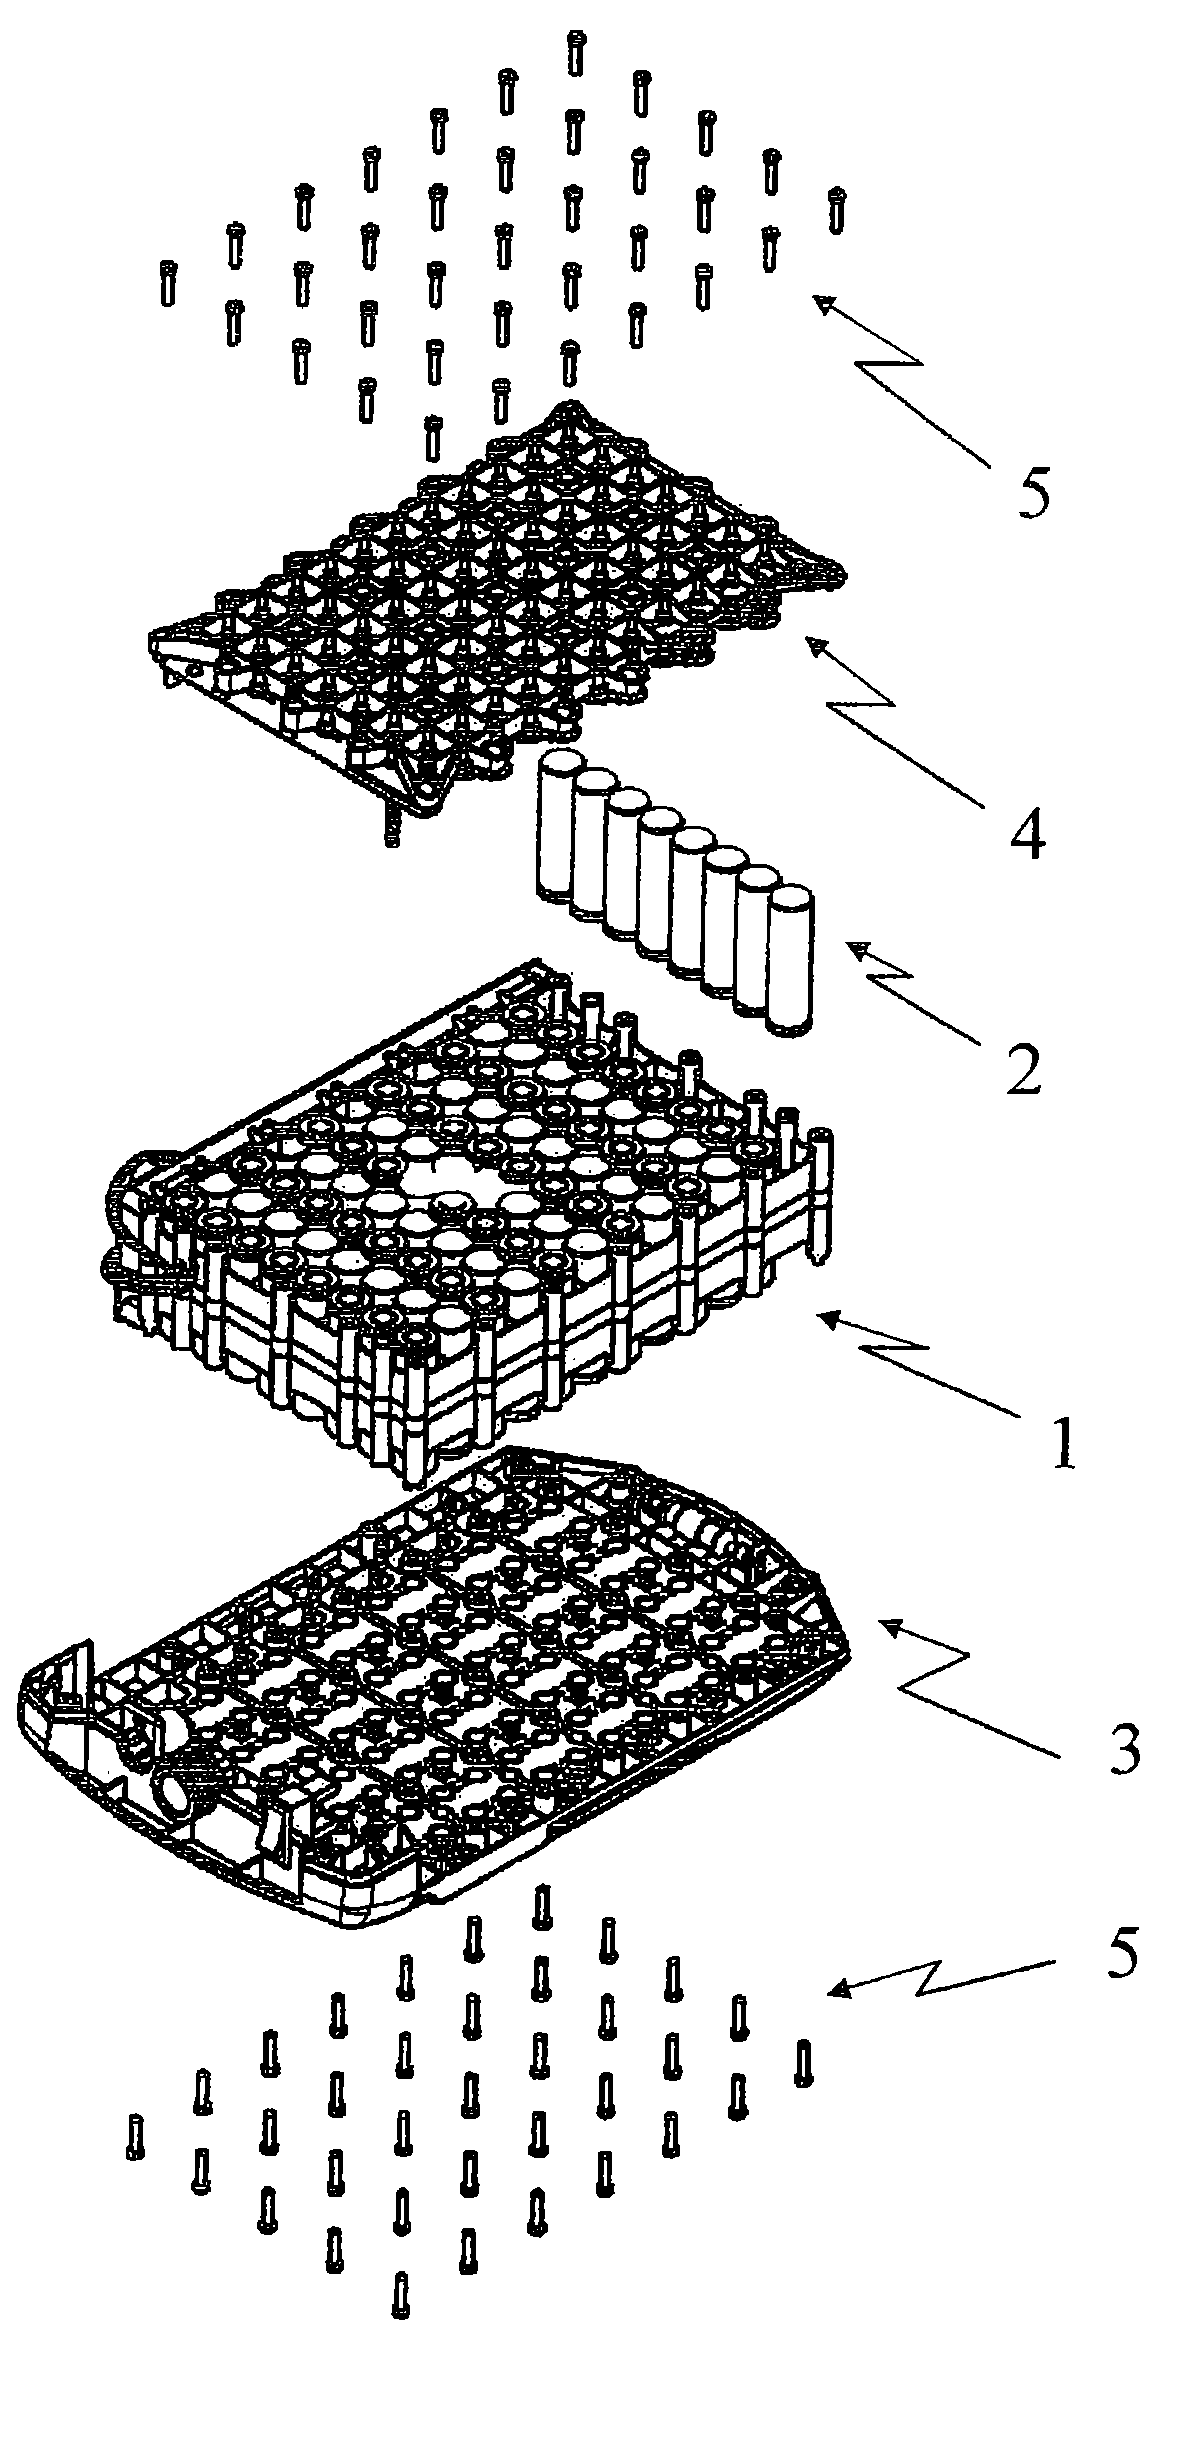 Battery consisting of a plurality of cells positioned and connected together without welding